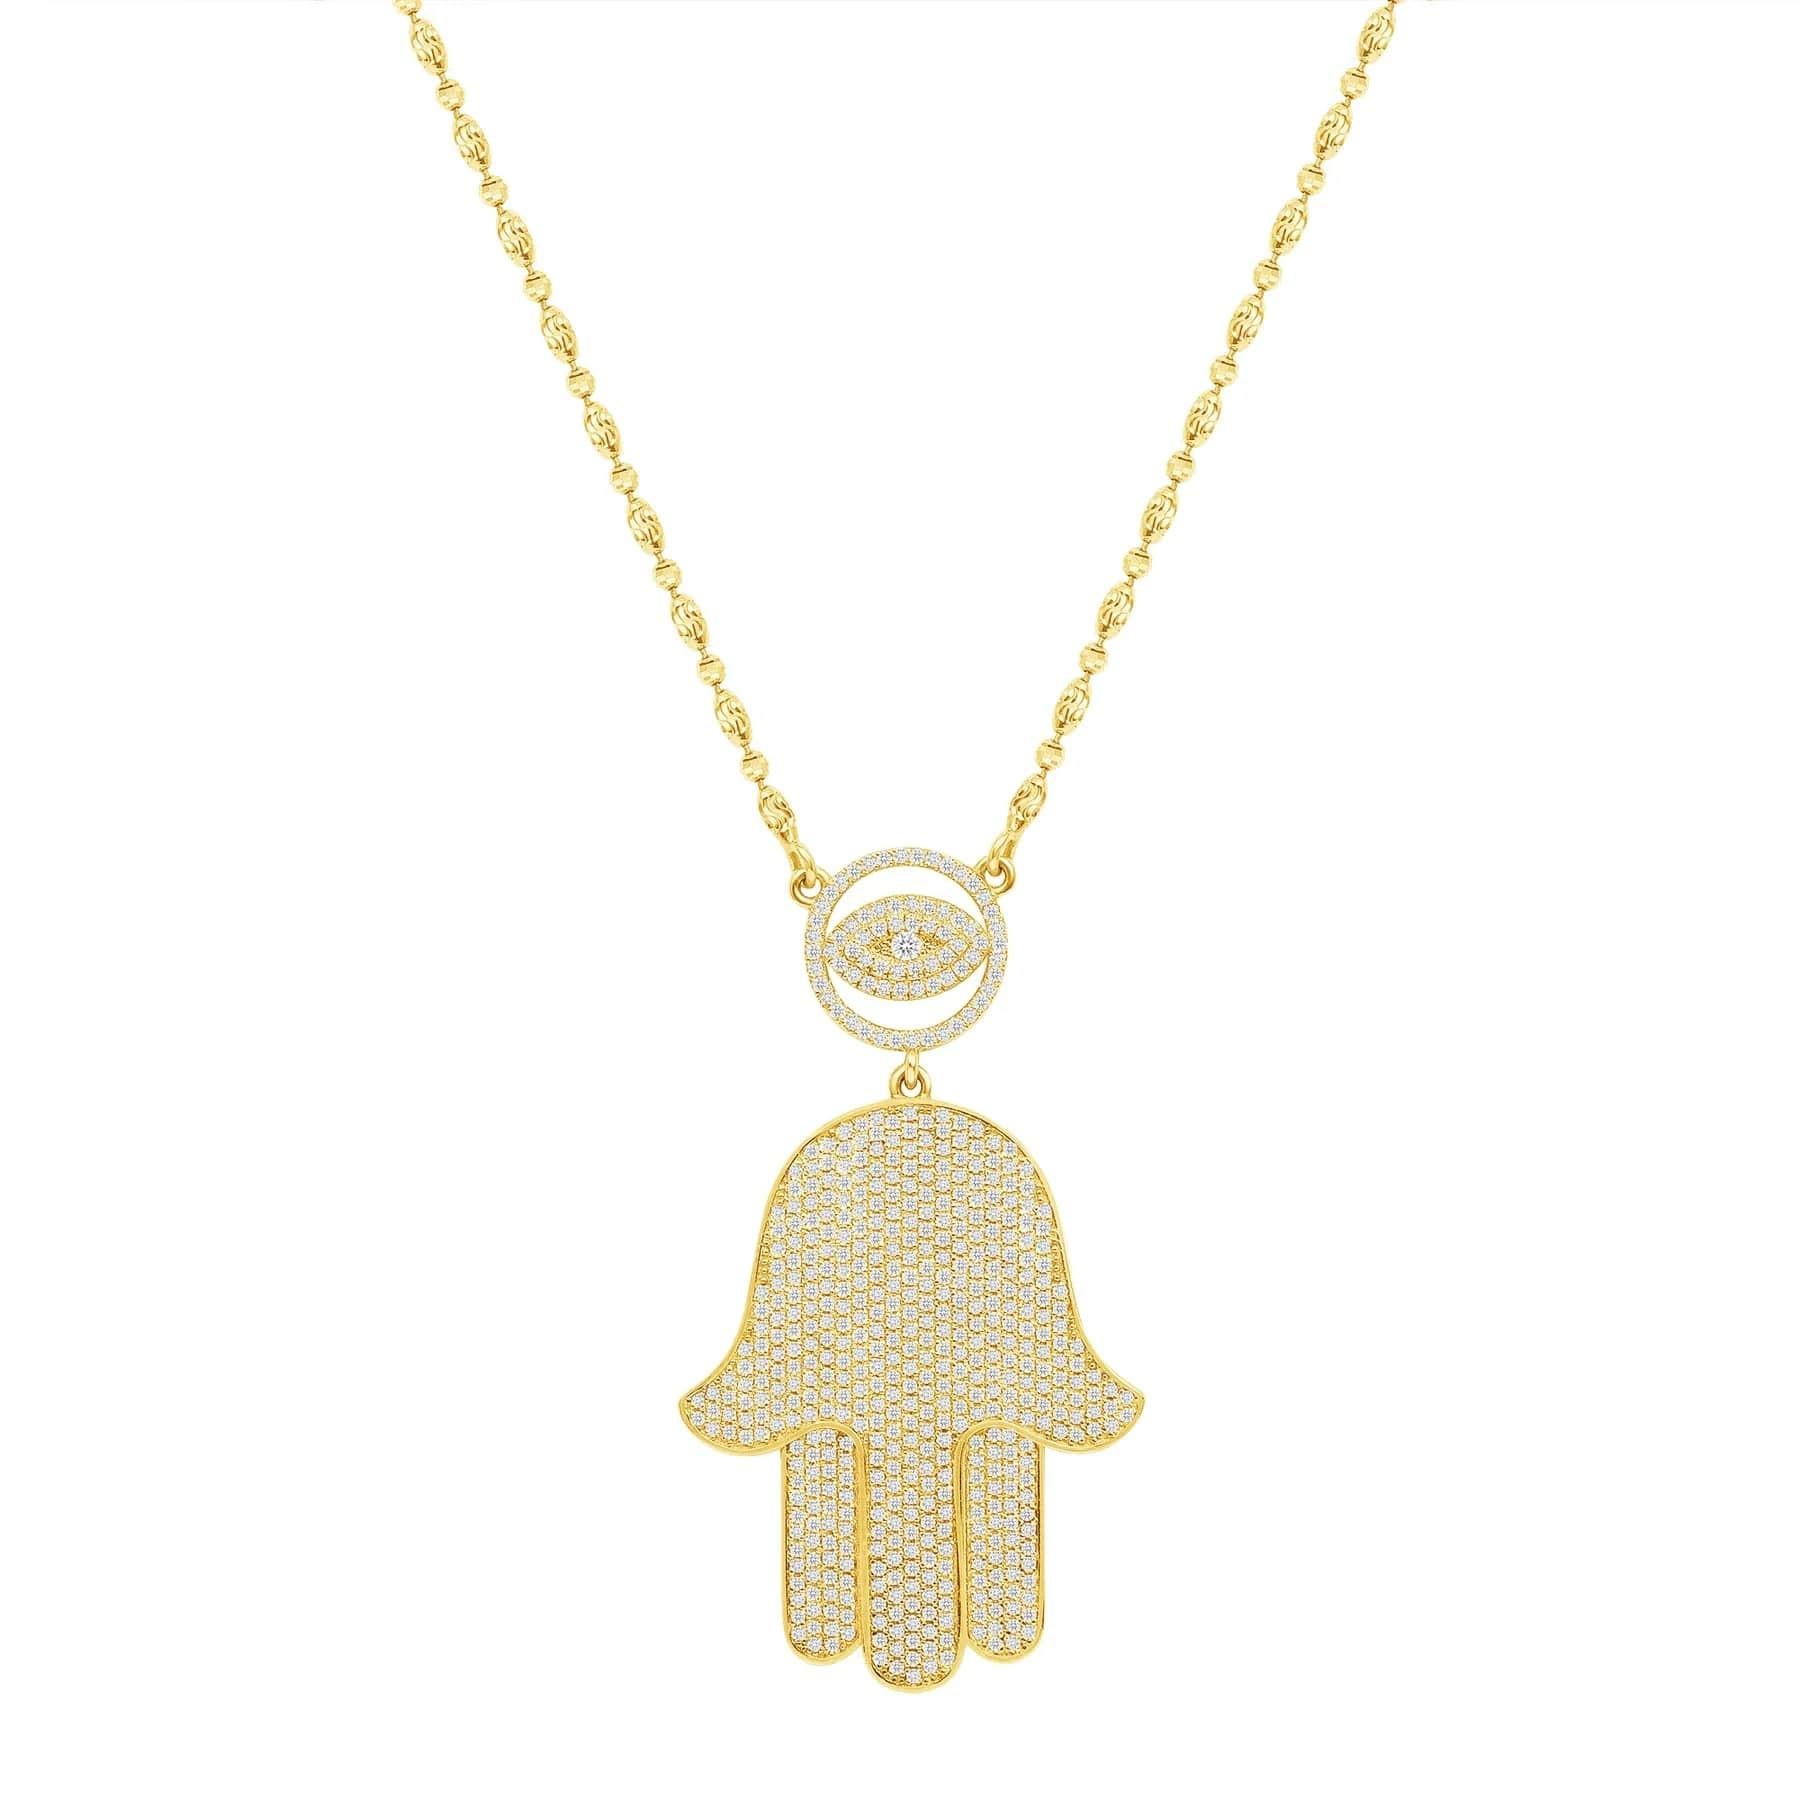 This Hamsa Eye Diamond Necklace provides both a spiritual and fashionable on trend look. A perfect gift for family members and friends.

Necklace Information
Metal : 14k Gold
Diamond Cut : Round
Total Diamond Carats : 1 Carat
Diamond Clarity :